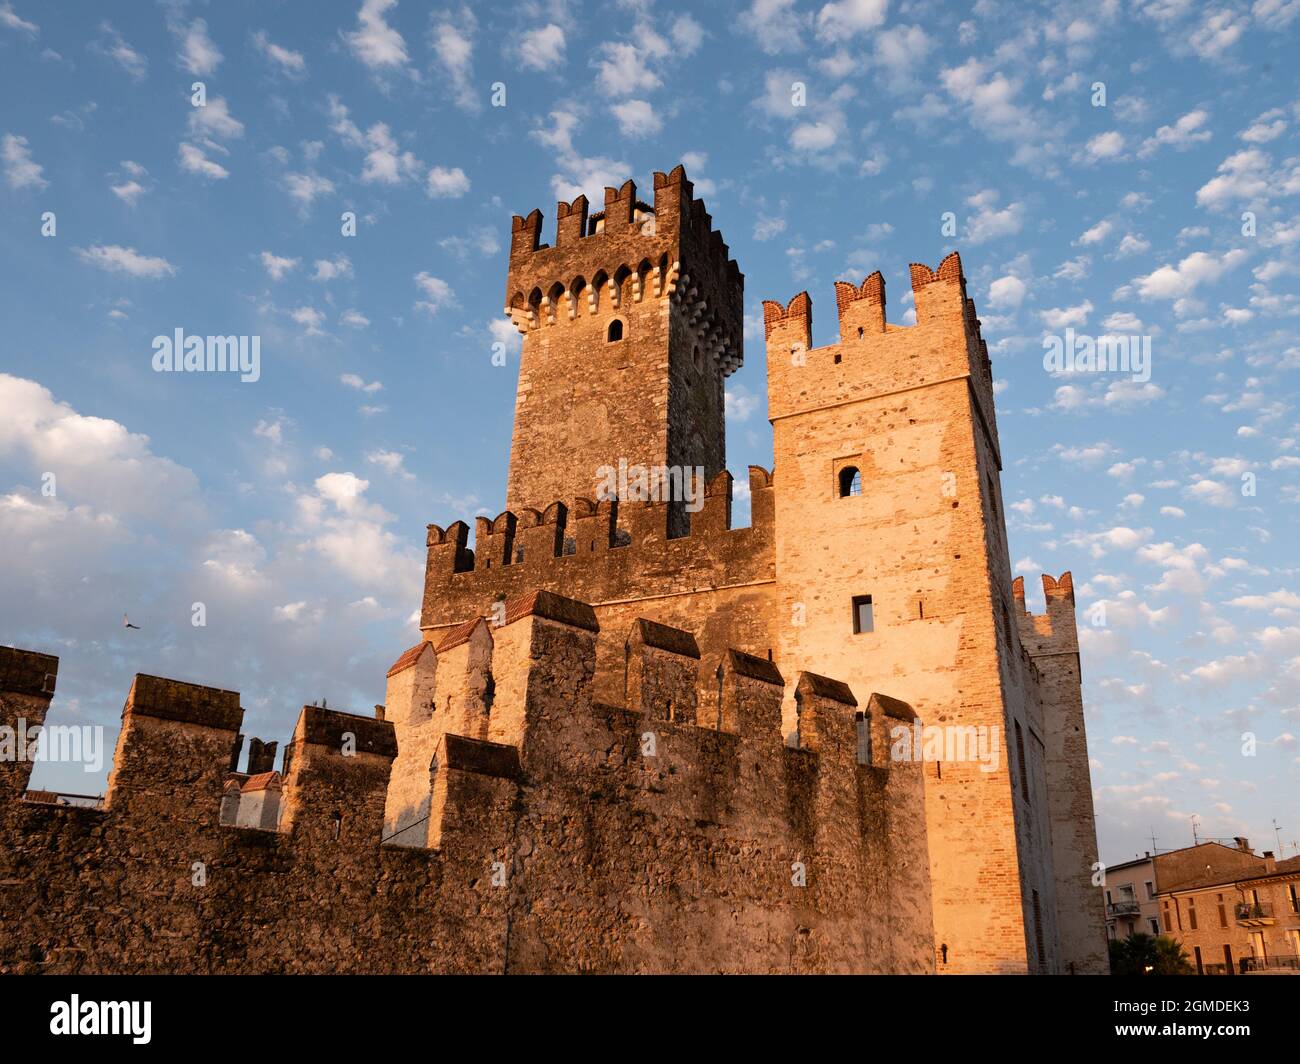 Scaligero Castle in Sirmione on Lake Garda, Lombardy, Italy in the Morning with Tower and Walls Stock Photo